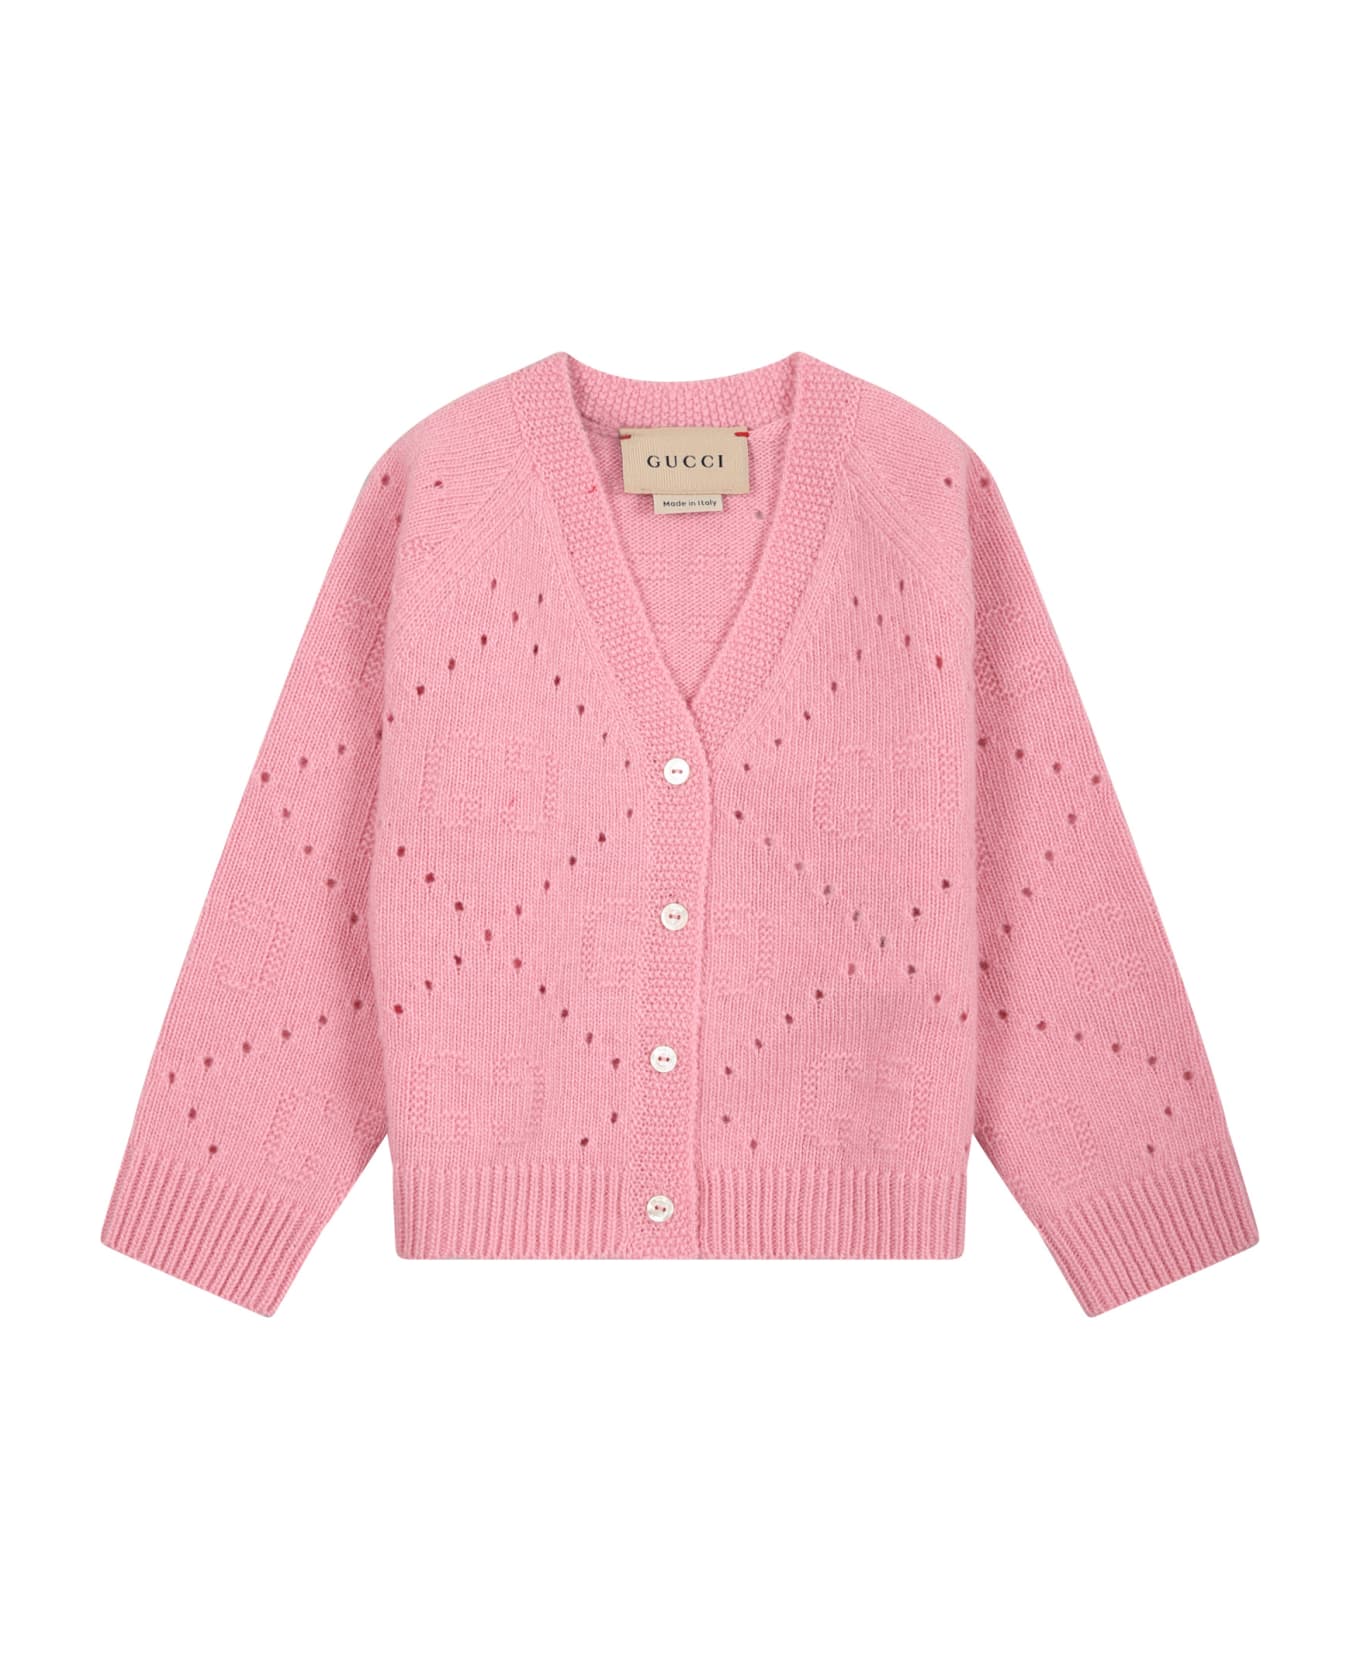 Gucci Pink Cardigan For Baby Girl With Gg - Pink ニットウェア＆スウェットシャツ